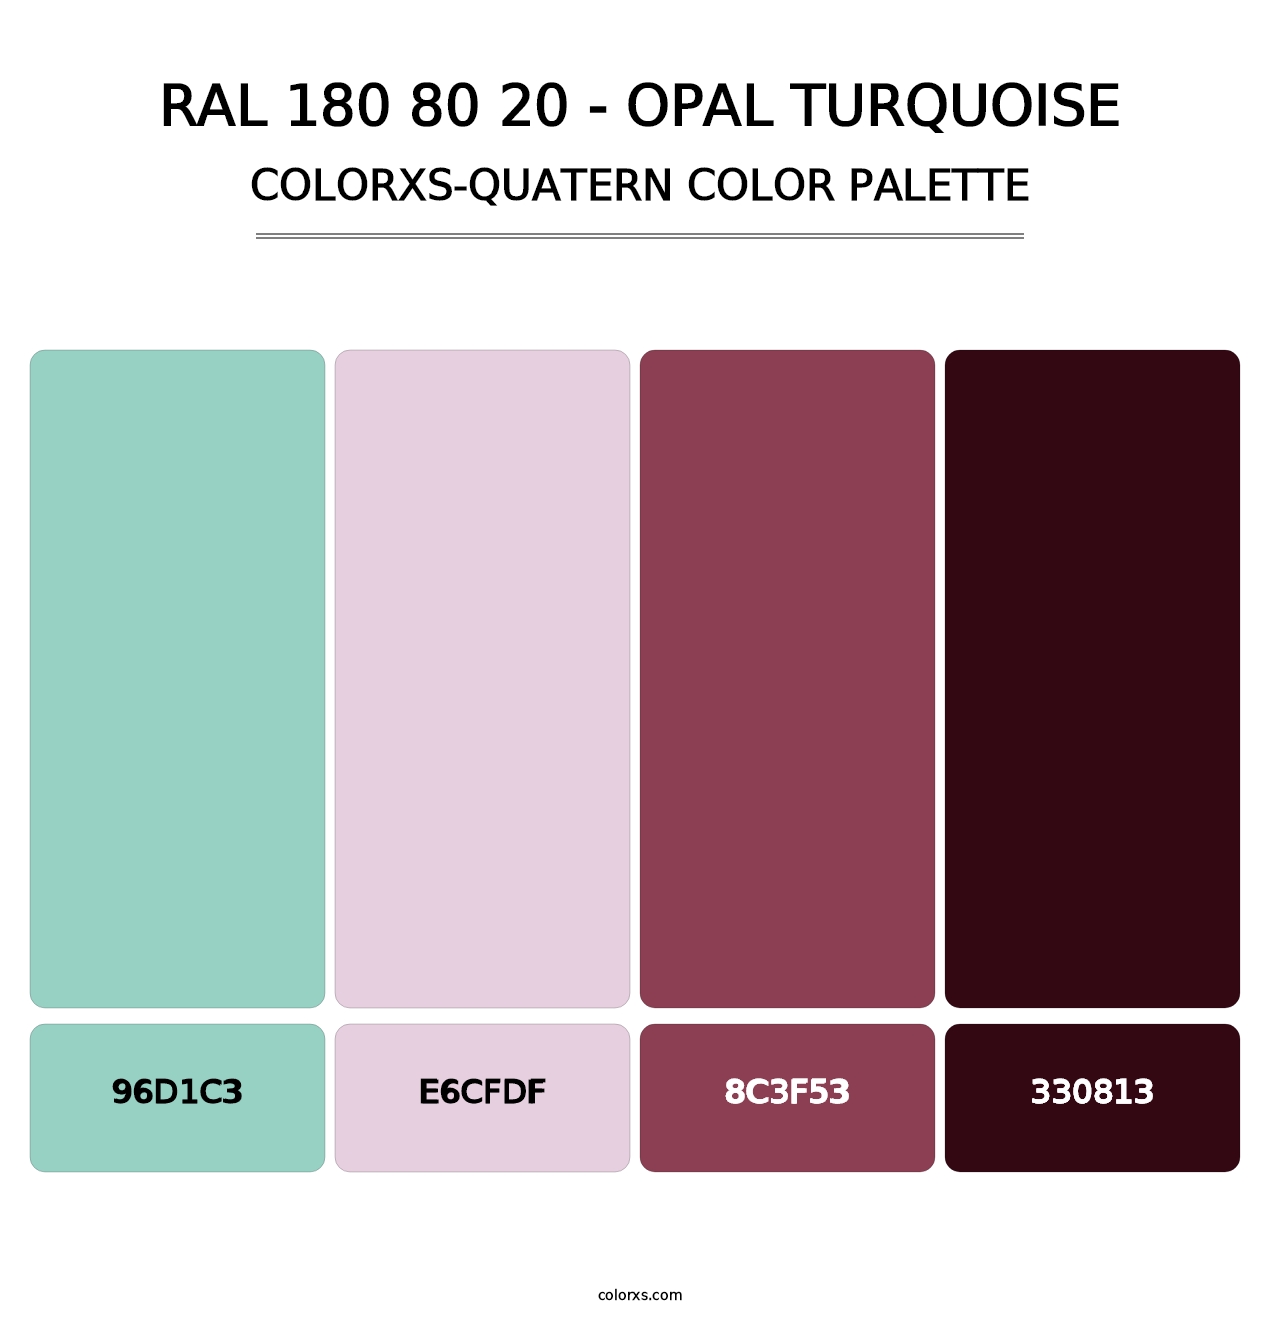 RAL 180 80 20 - Opal Turquoise - Colorxs Quatern Palette